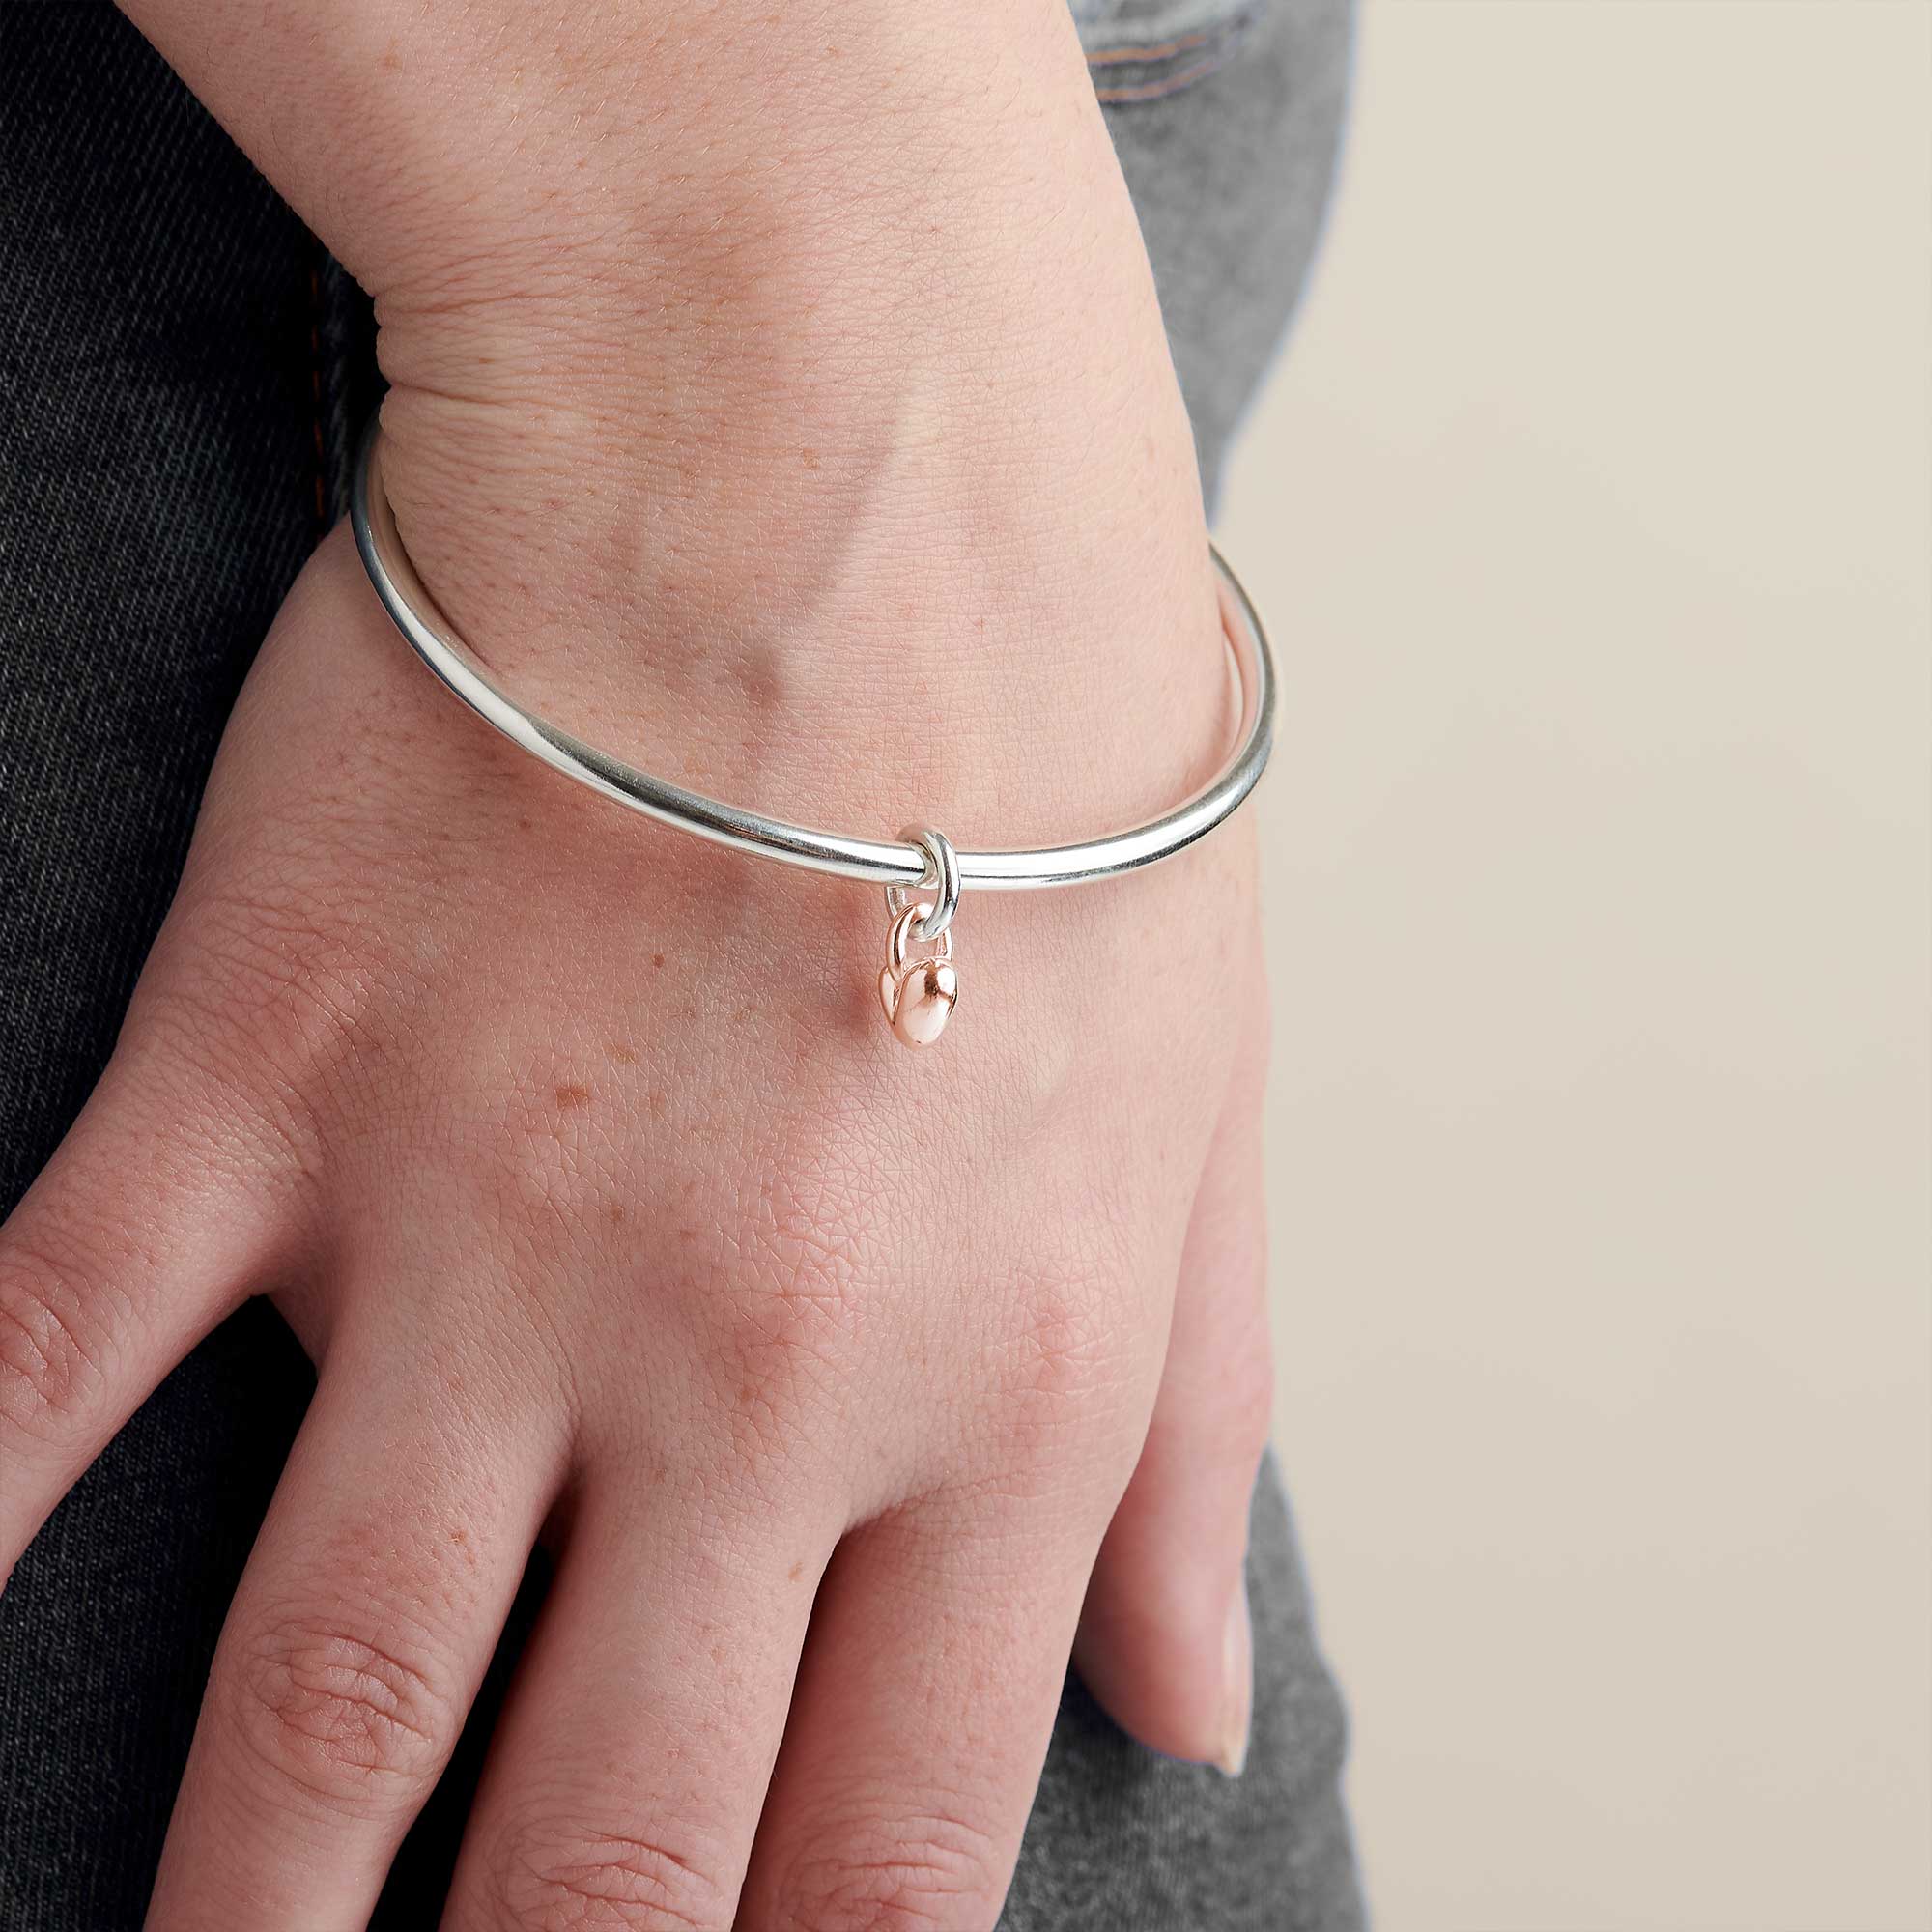 solid silver bangle with recycled rose gold heart charm made in the UK Scarlett Jewellery